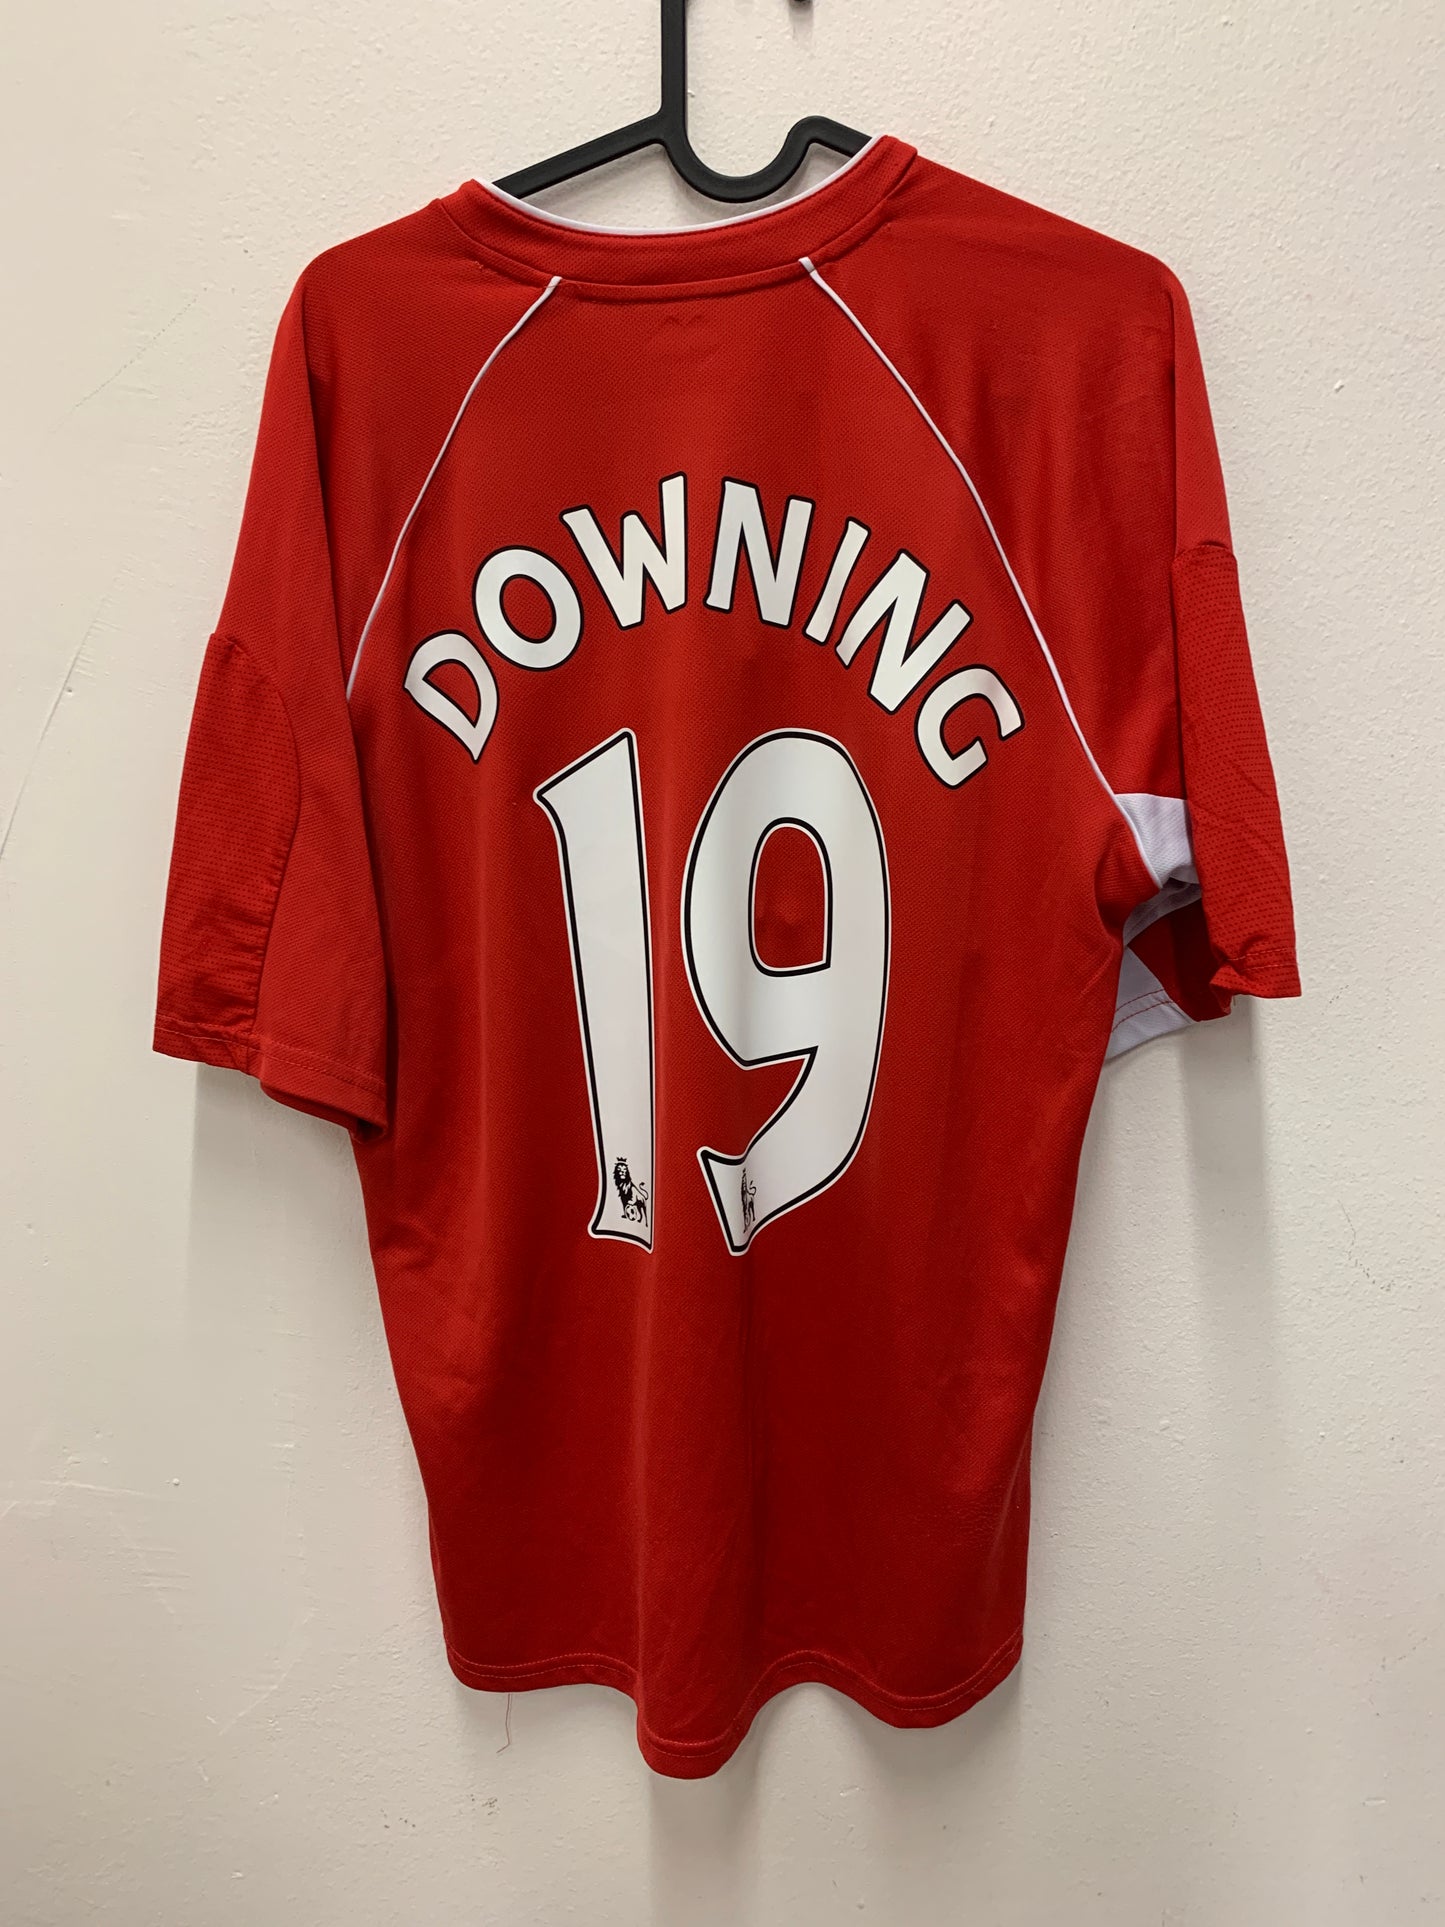 Middlesbrough Home 08/09 Downing 19